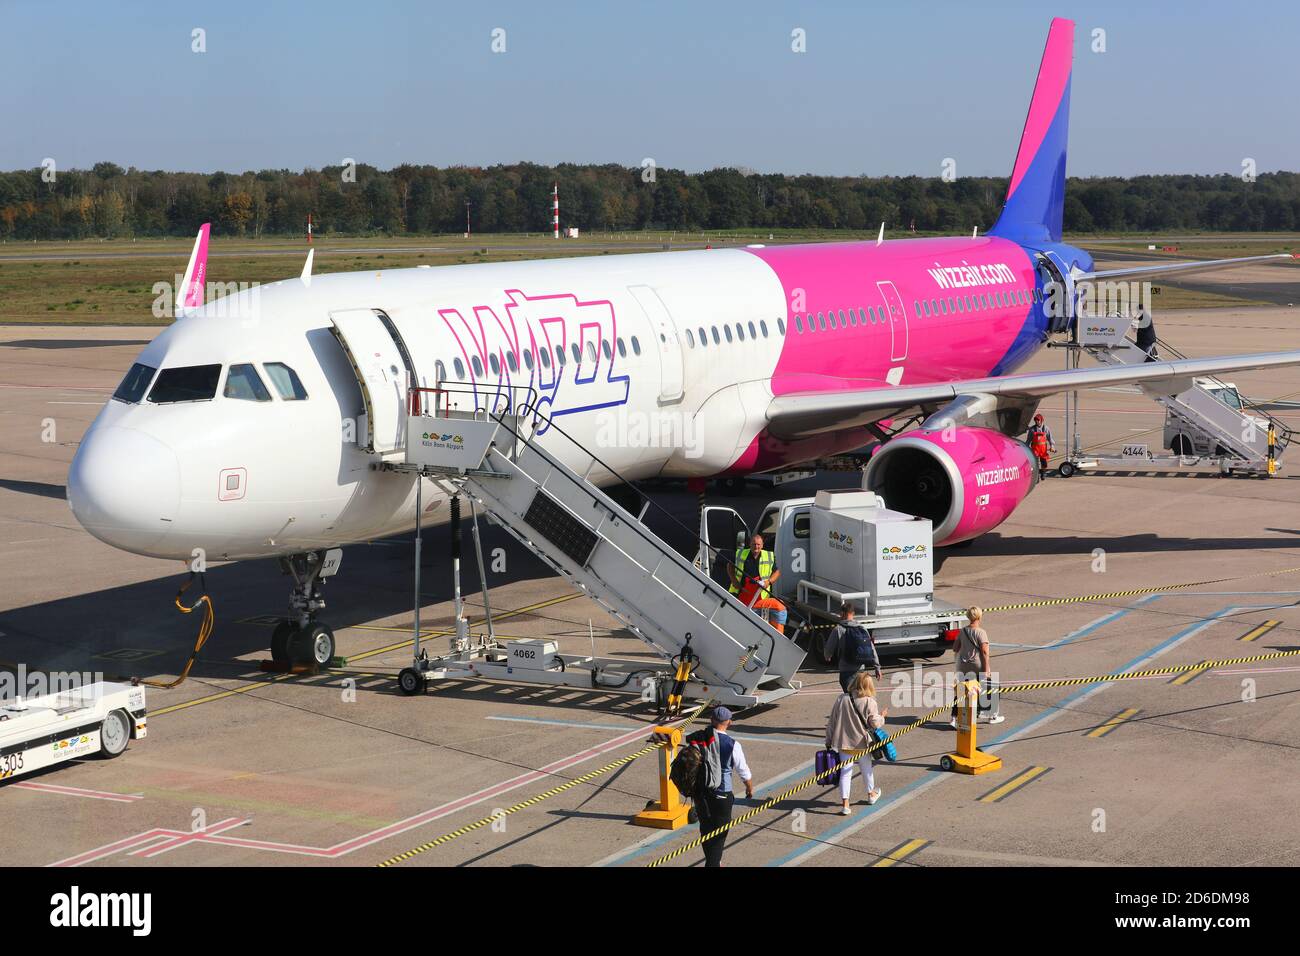 COLOGNE, GERMANY - SEPTEMBER 22, 2020: Passengers board Wizzair Airbus A321 at Cologne/Bonn Airport, Germany. Cologne/Bonn is the seventh-busiest pass Stock Photo